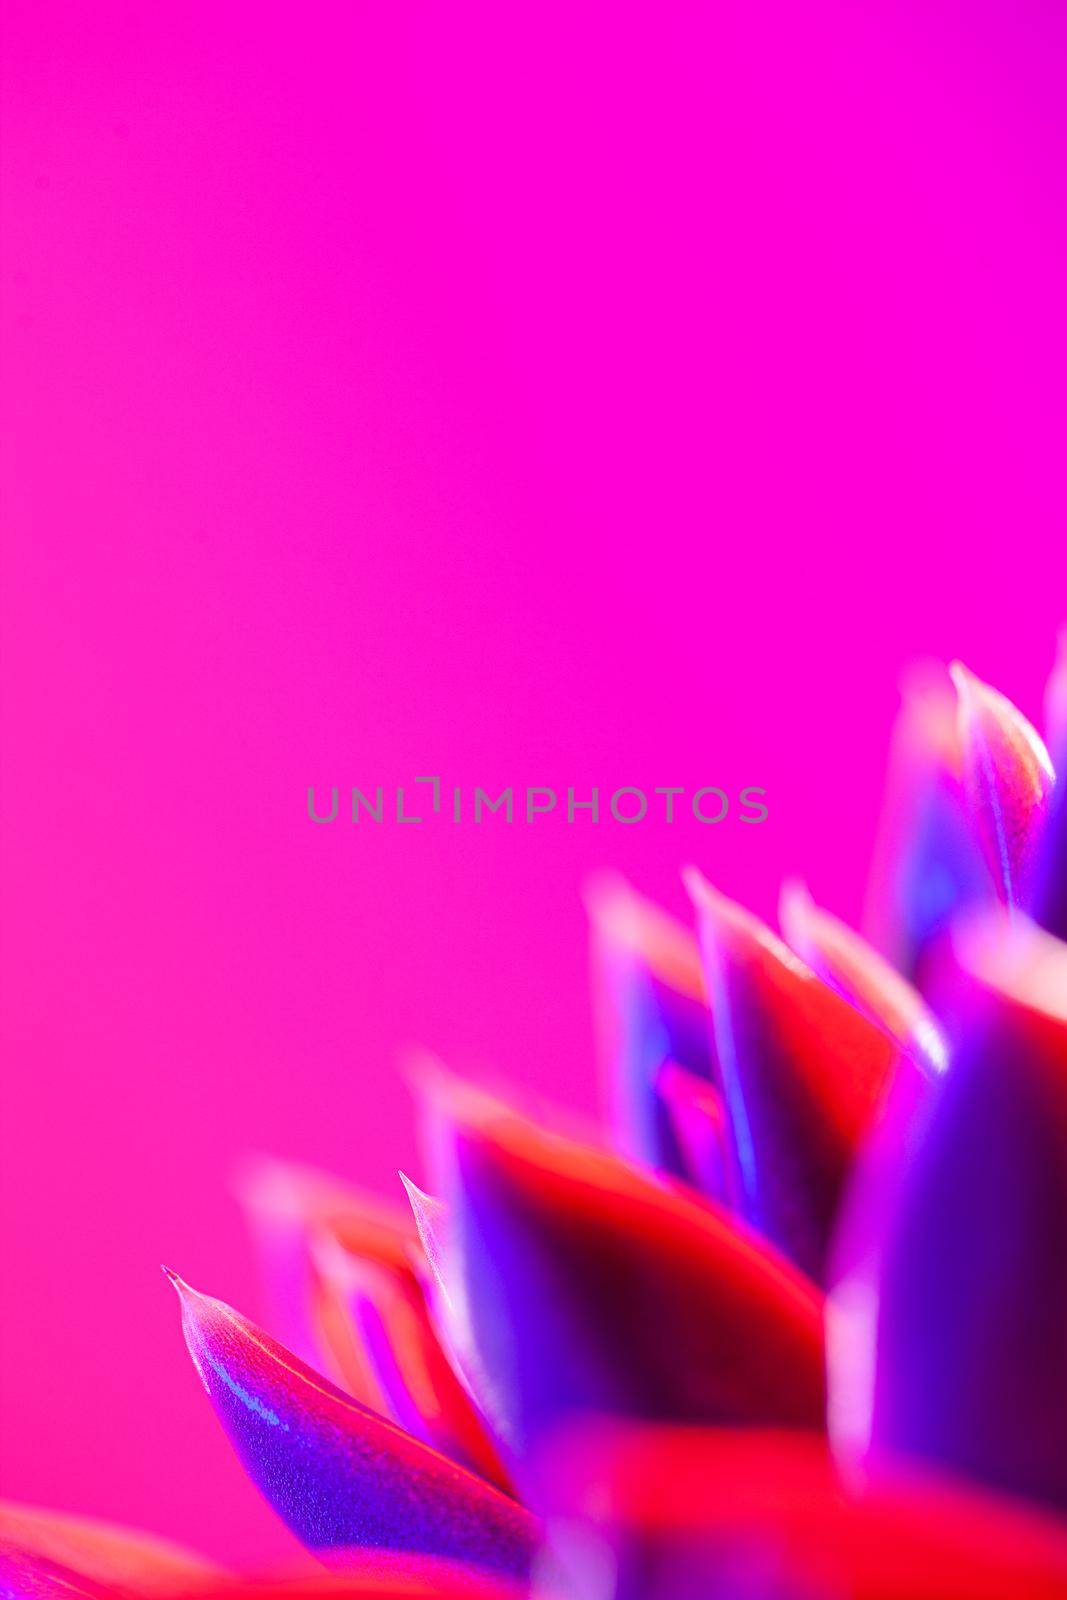 Close-up of a green agavoides echeveria flower on a vibrant dark pink background. by igor_stramyk